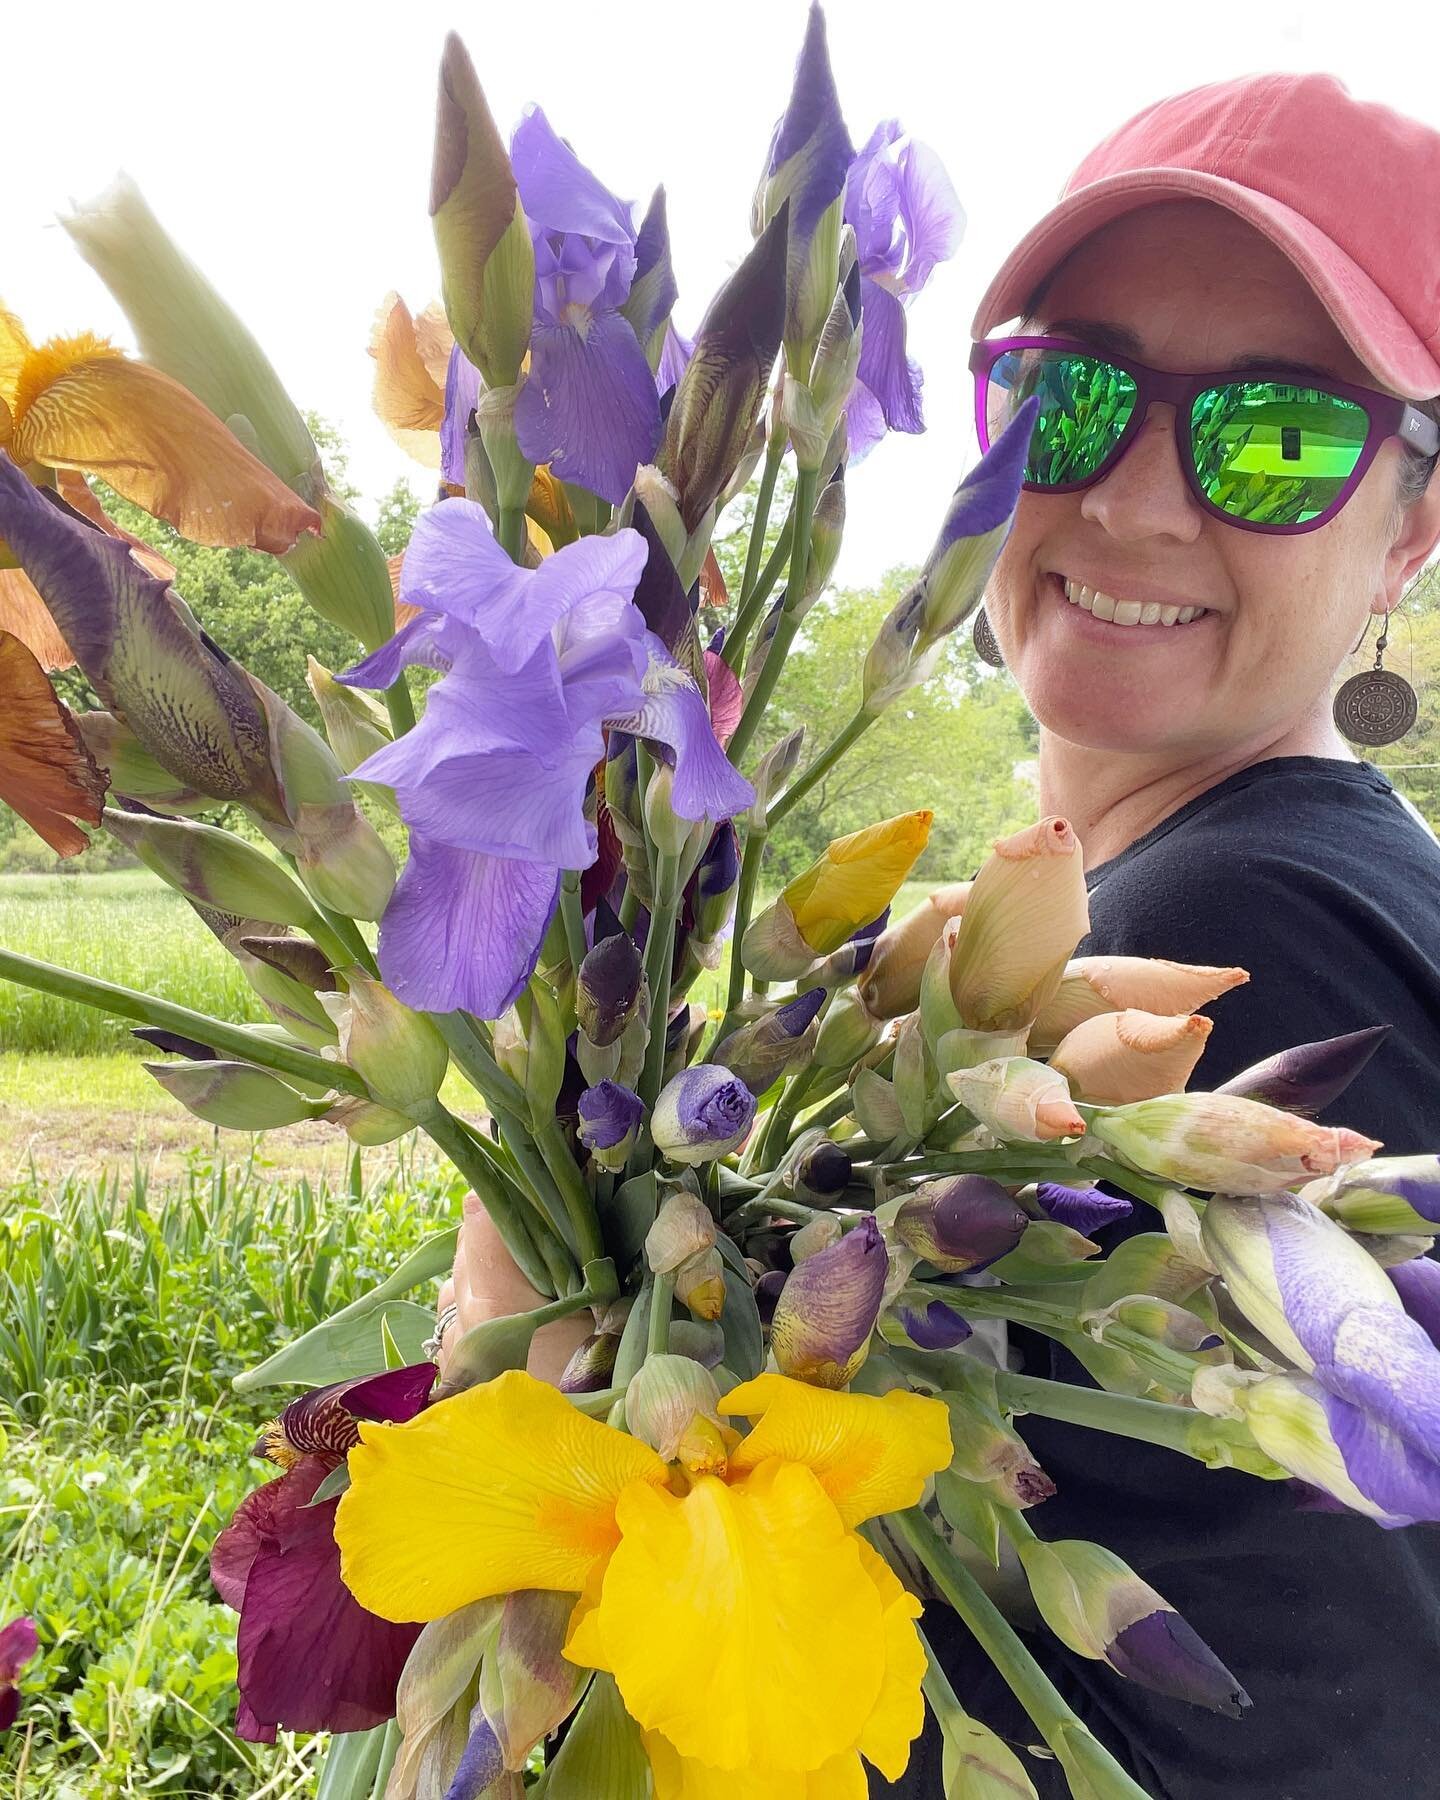 Iris coming at ya! If you&rsquo;ve never stopped to smell the iris&hellip;.I suggest you try that today. It&rsquo;s a beautiful scent! #missourigrownflowers #oldfashionedflowers #vintageflowers #heirloomflowers #slowflowers #flowerfarmer